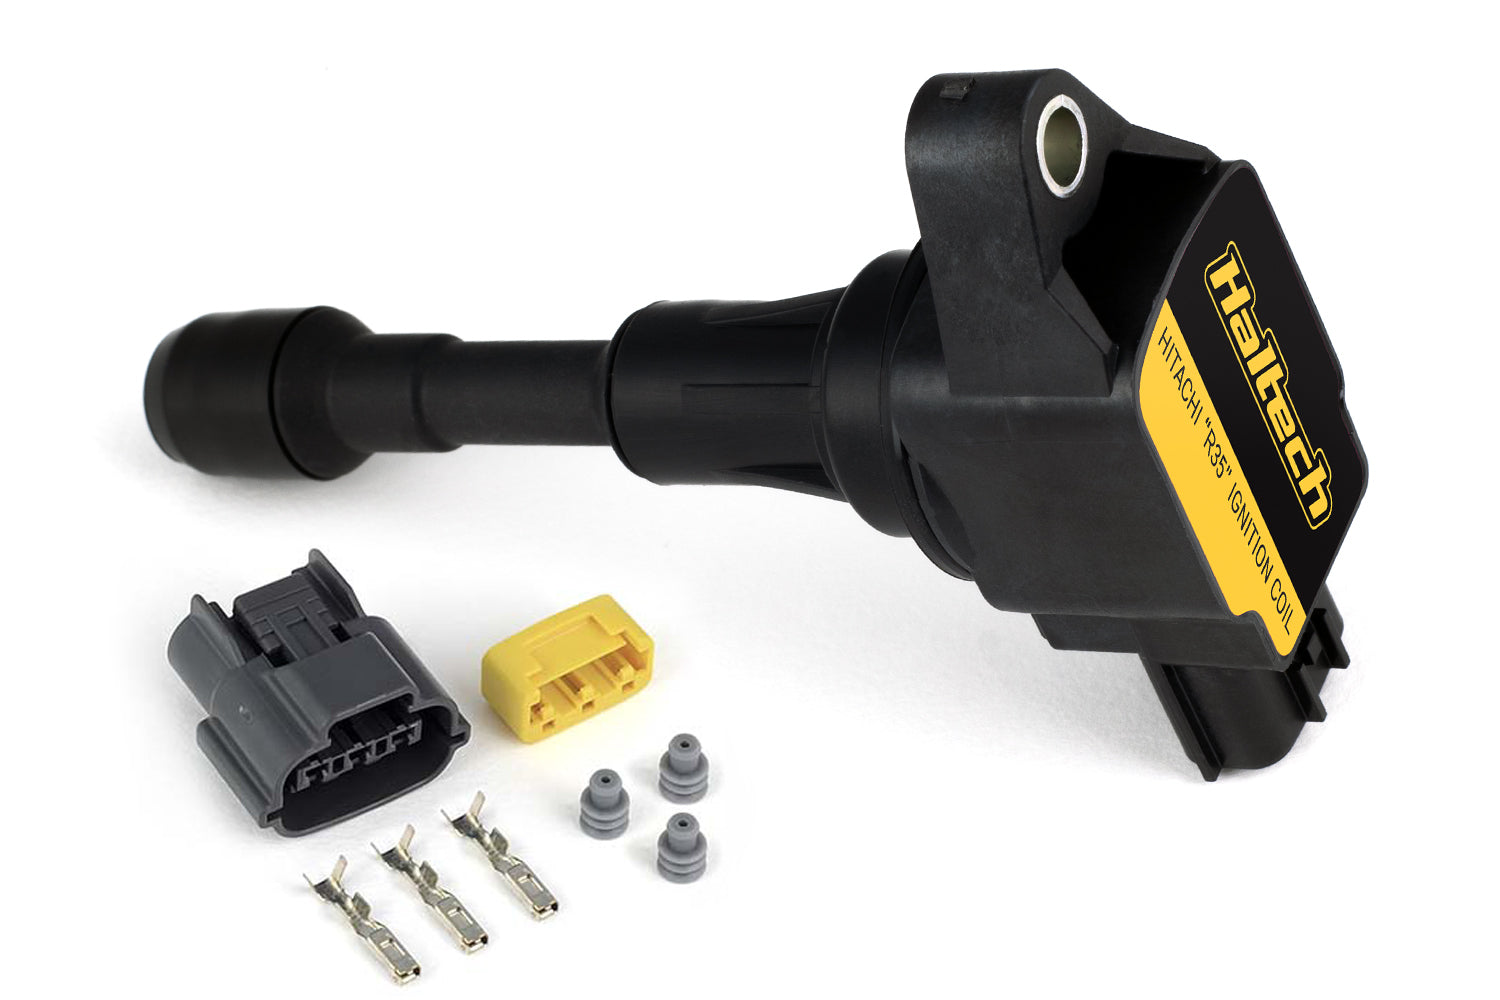 Haltech Hitachi Ignition Coil w/Built-In Ignitor (Incl Plug & Pins) (R35 GTR)